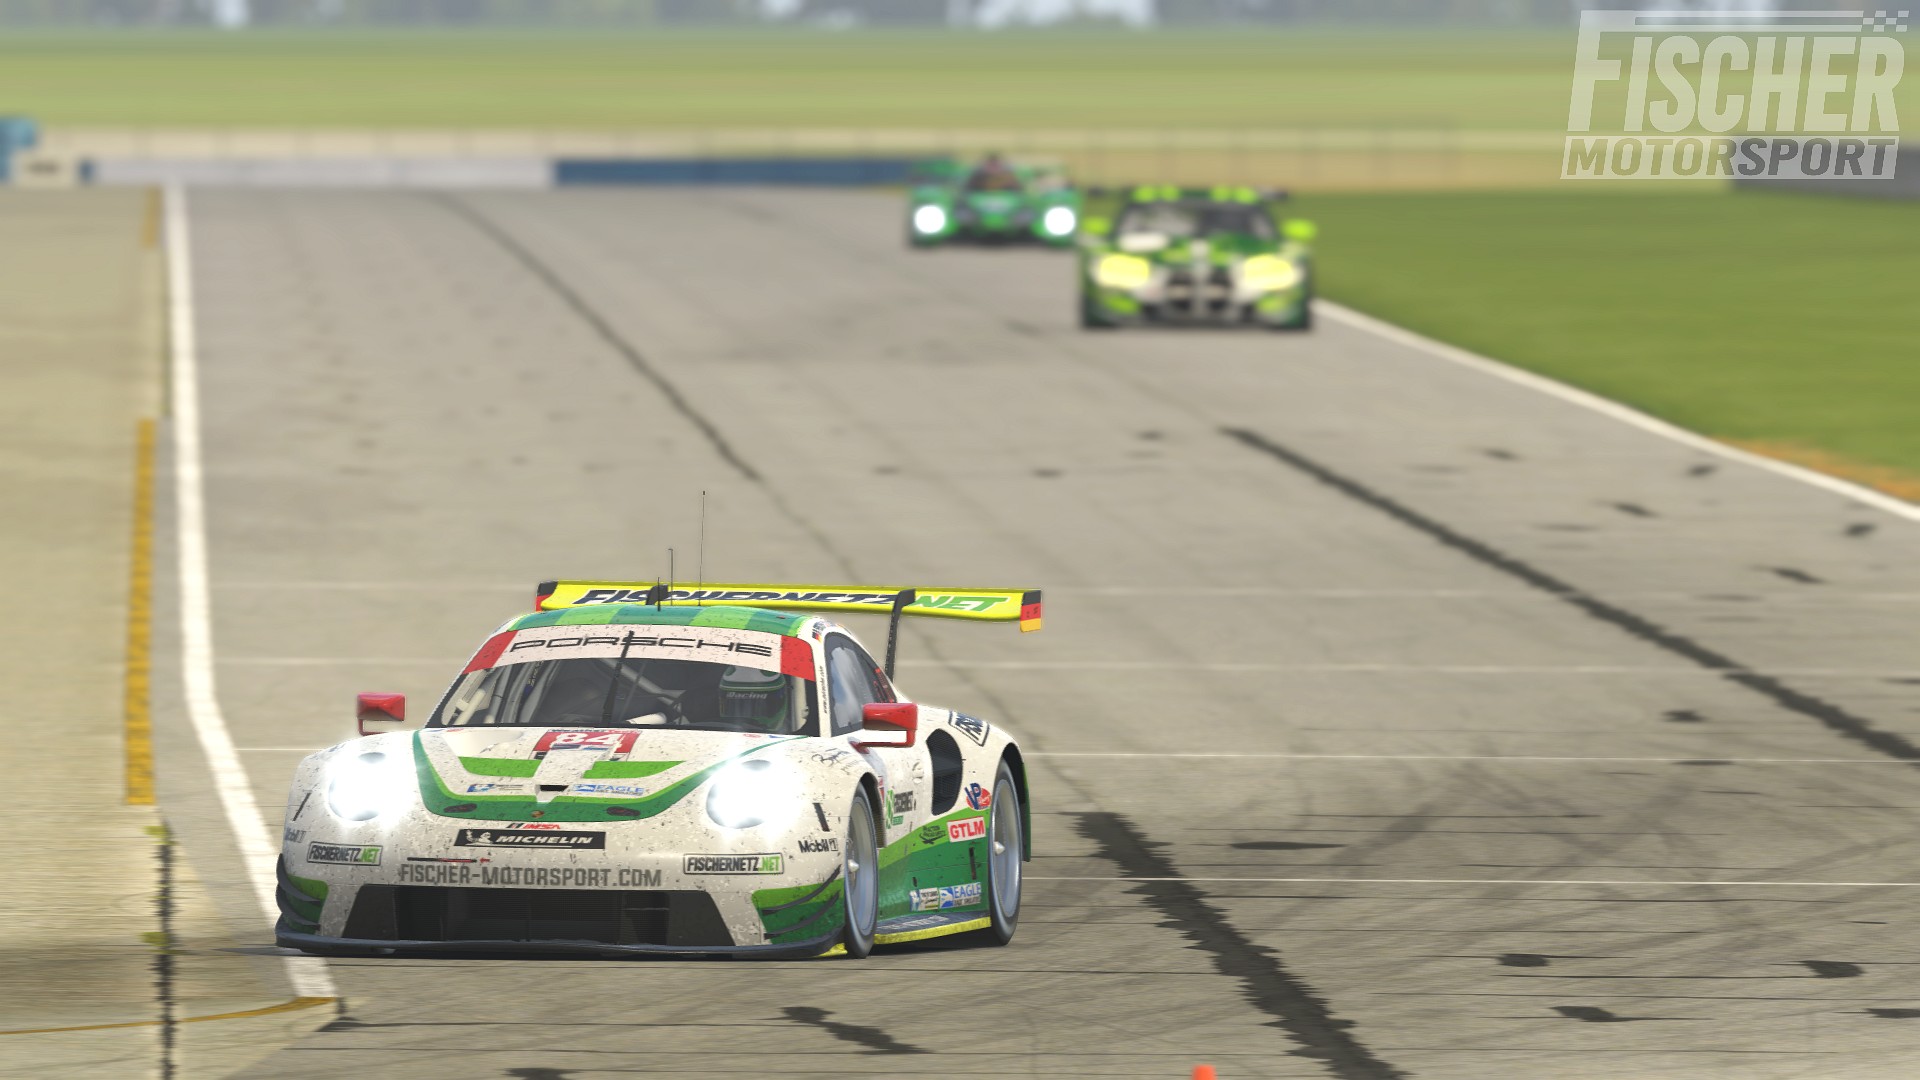 2021 IRACING 12 HOURS OF SEBRING